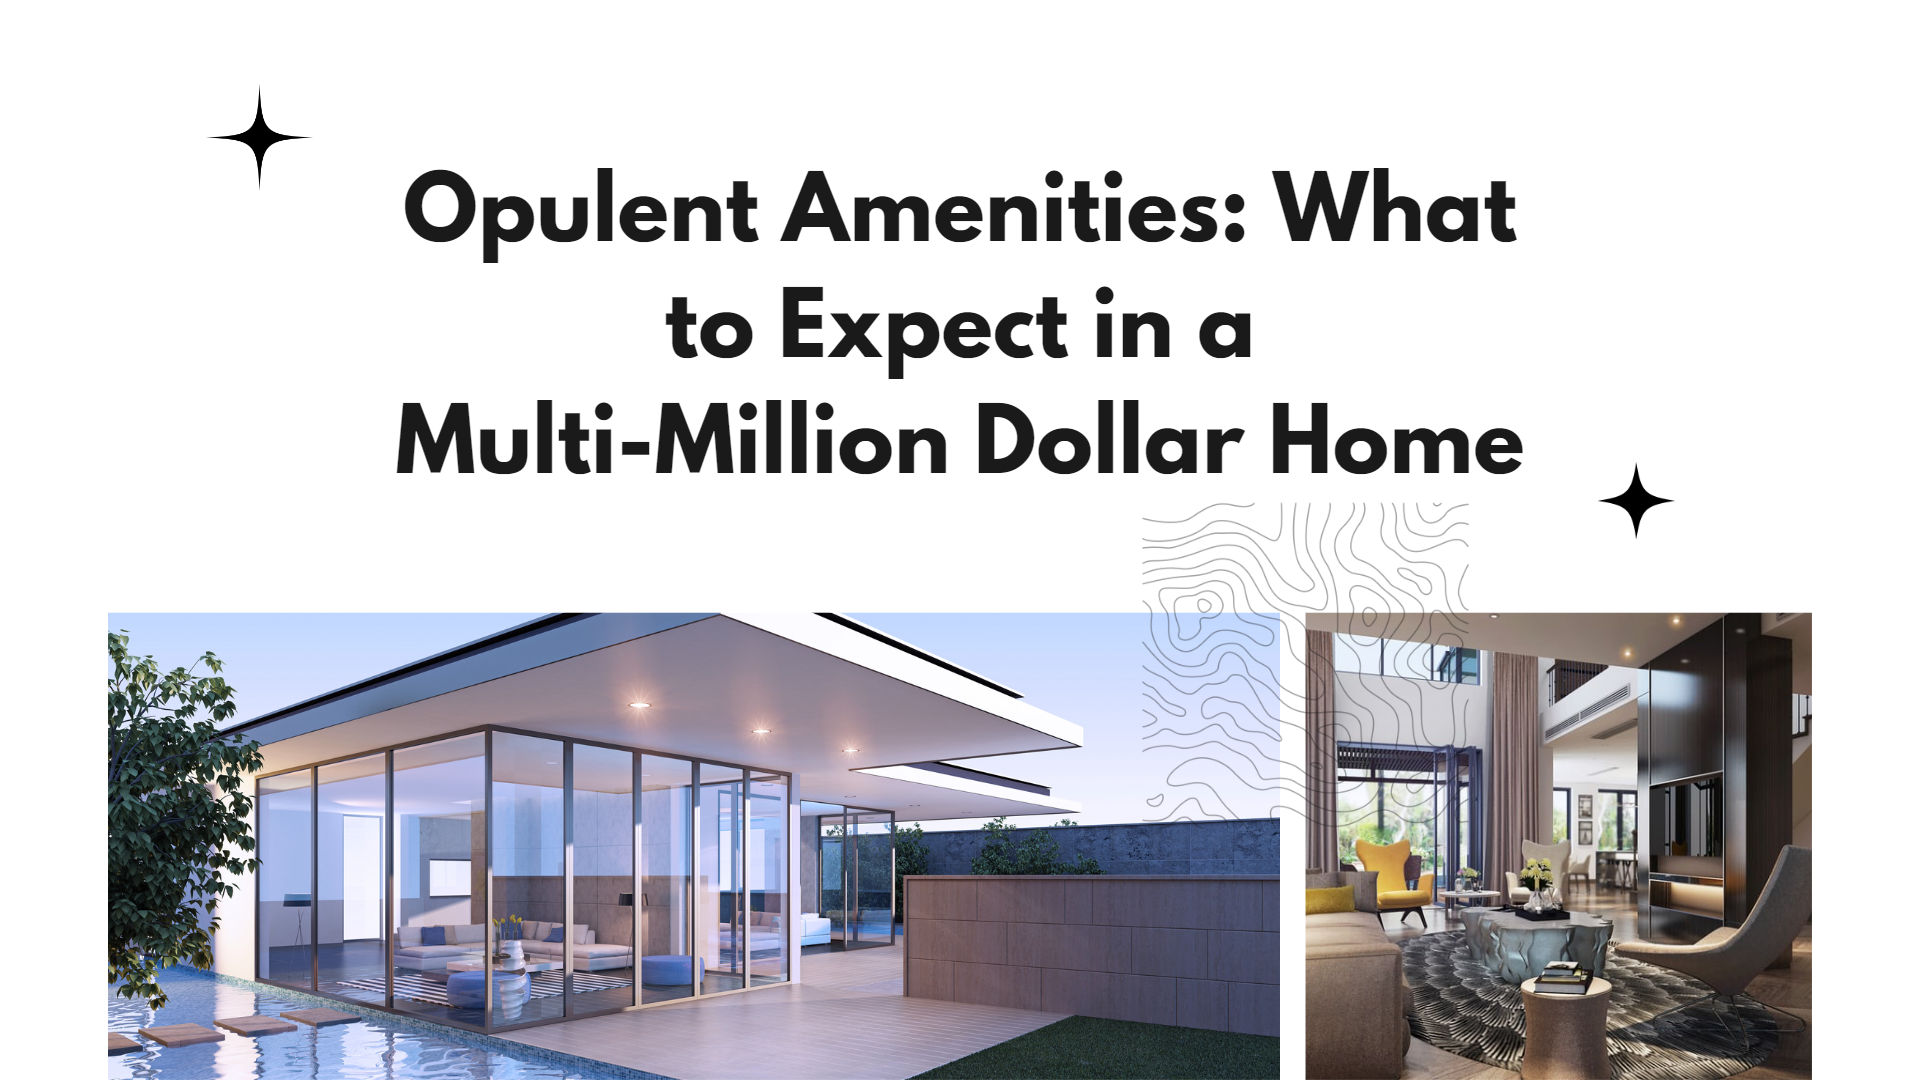 Opulent Amenities: What to Expect in a Multi-Million Dollar Home